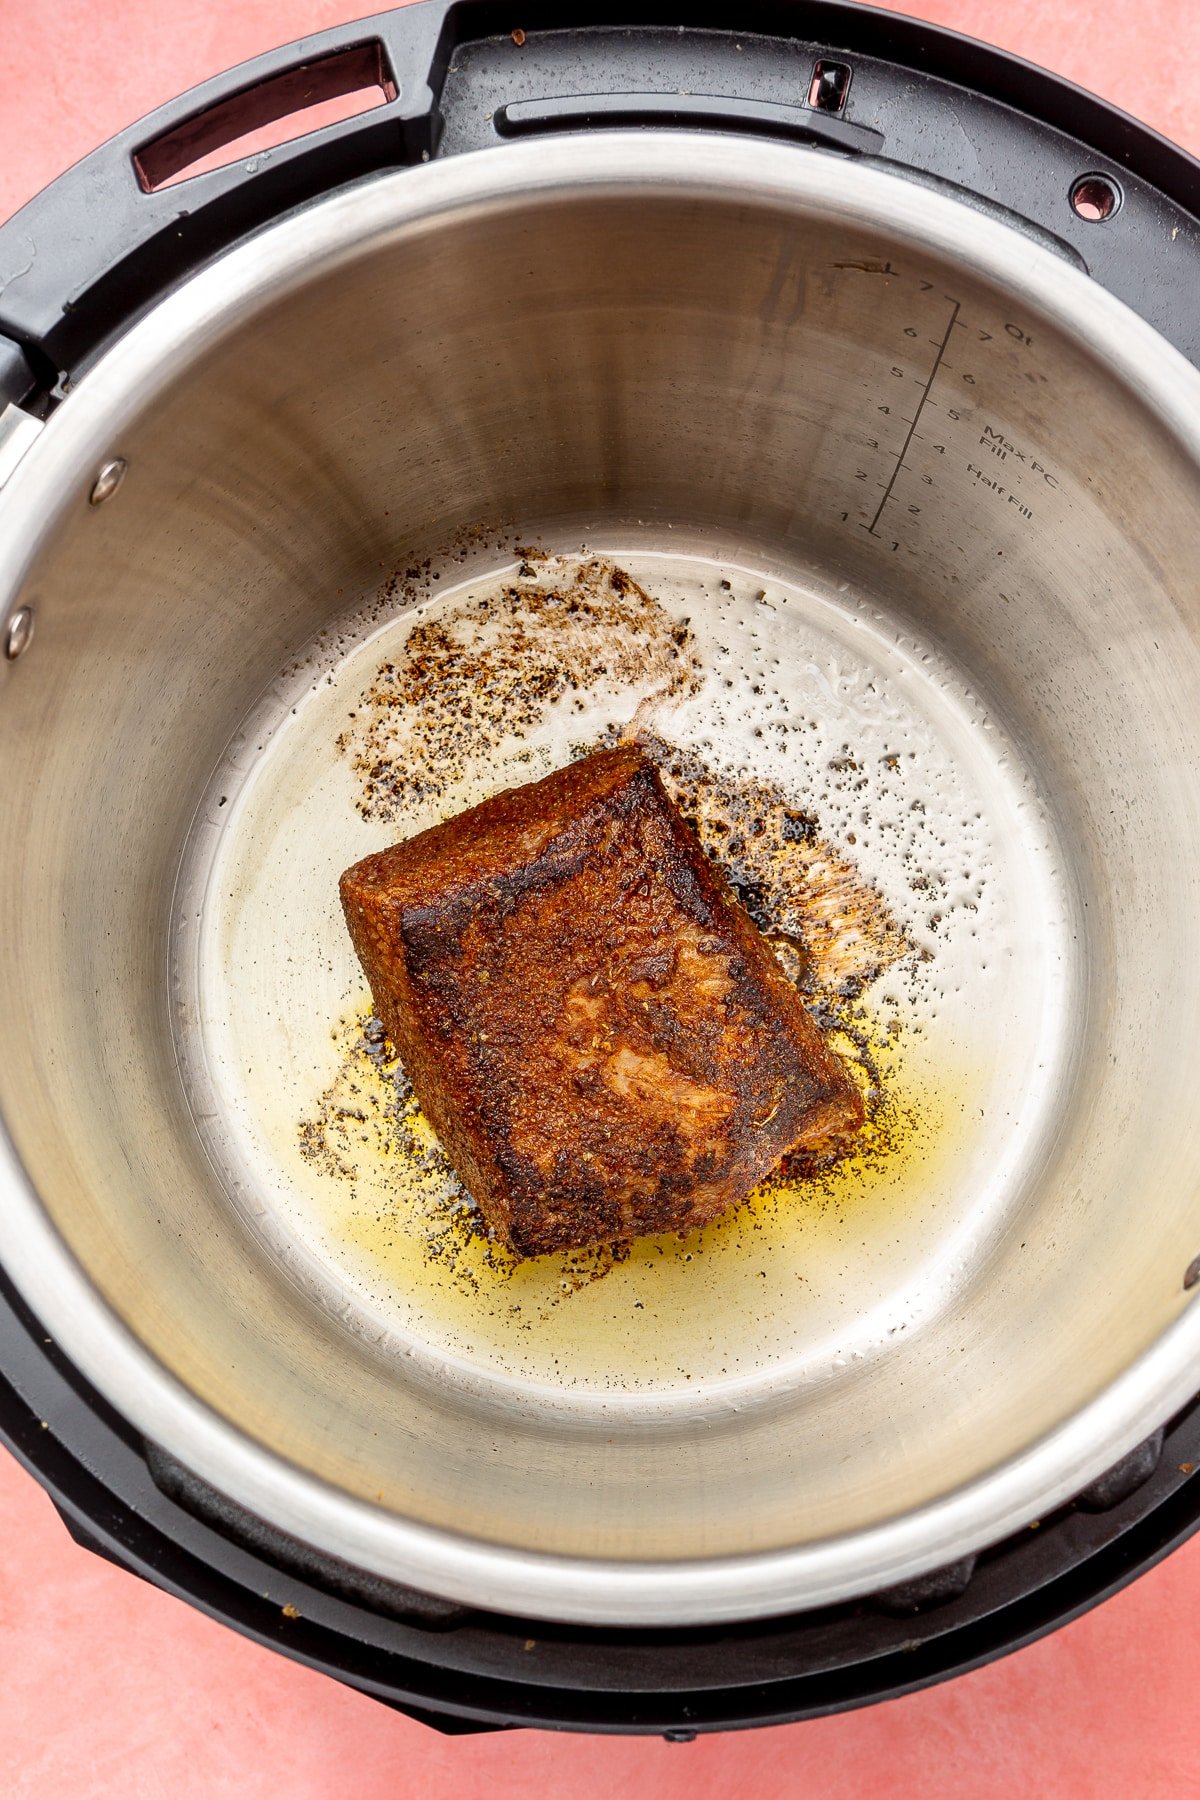 A rectangular piece of beef brisket is being seared in an instant pot. It is golden brown in color.